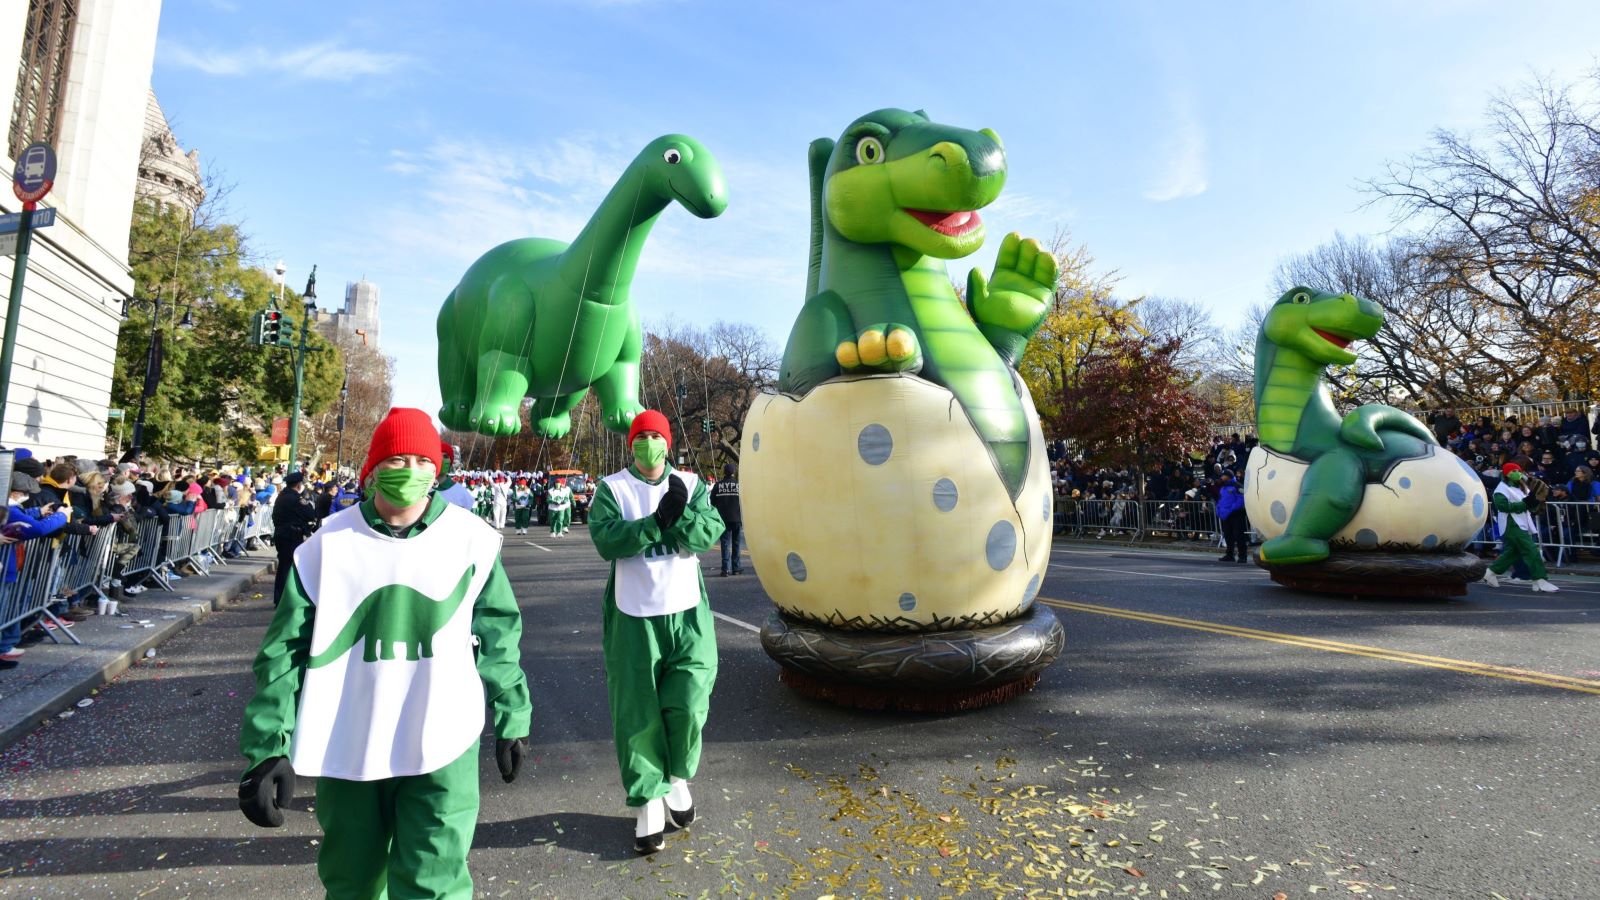 View of the Dinosaur balloons as 95 And Marching On! Macy's Parade® Thanksgiving Day ushers in the Holiday Season on November 25, 2021 in New York City. (Photo by Eugene Gologursky/Getty Images for Macy's Inc.)